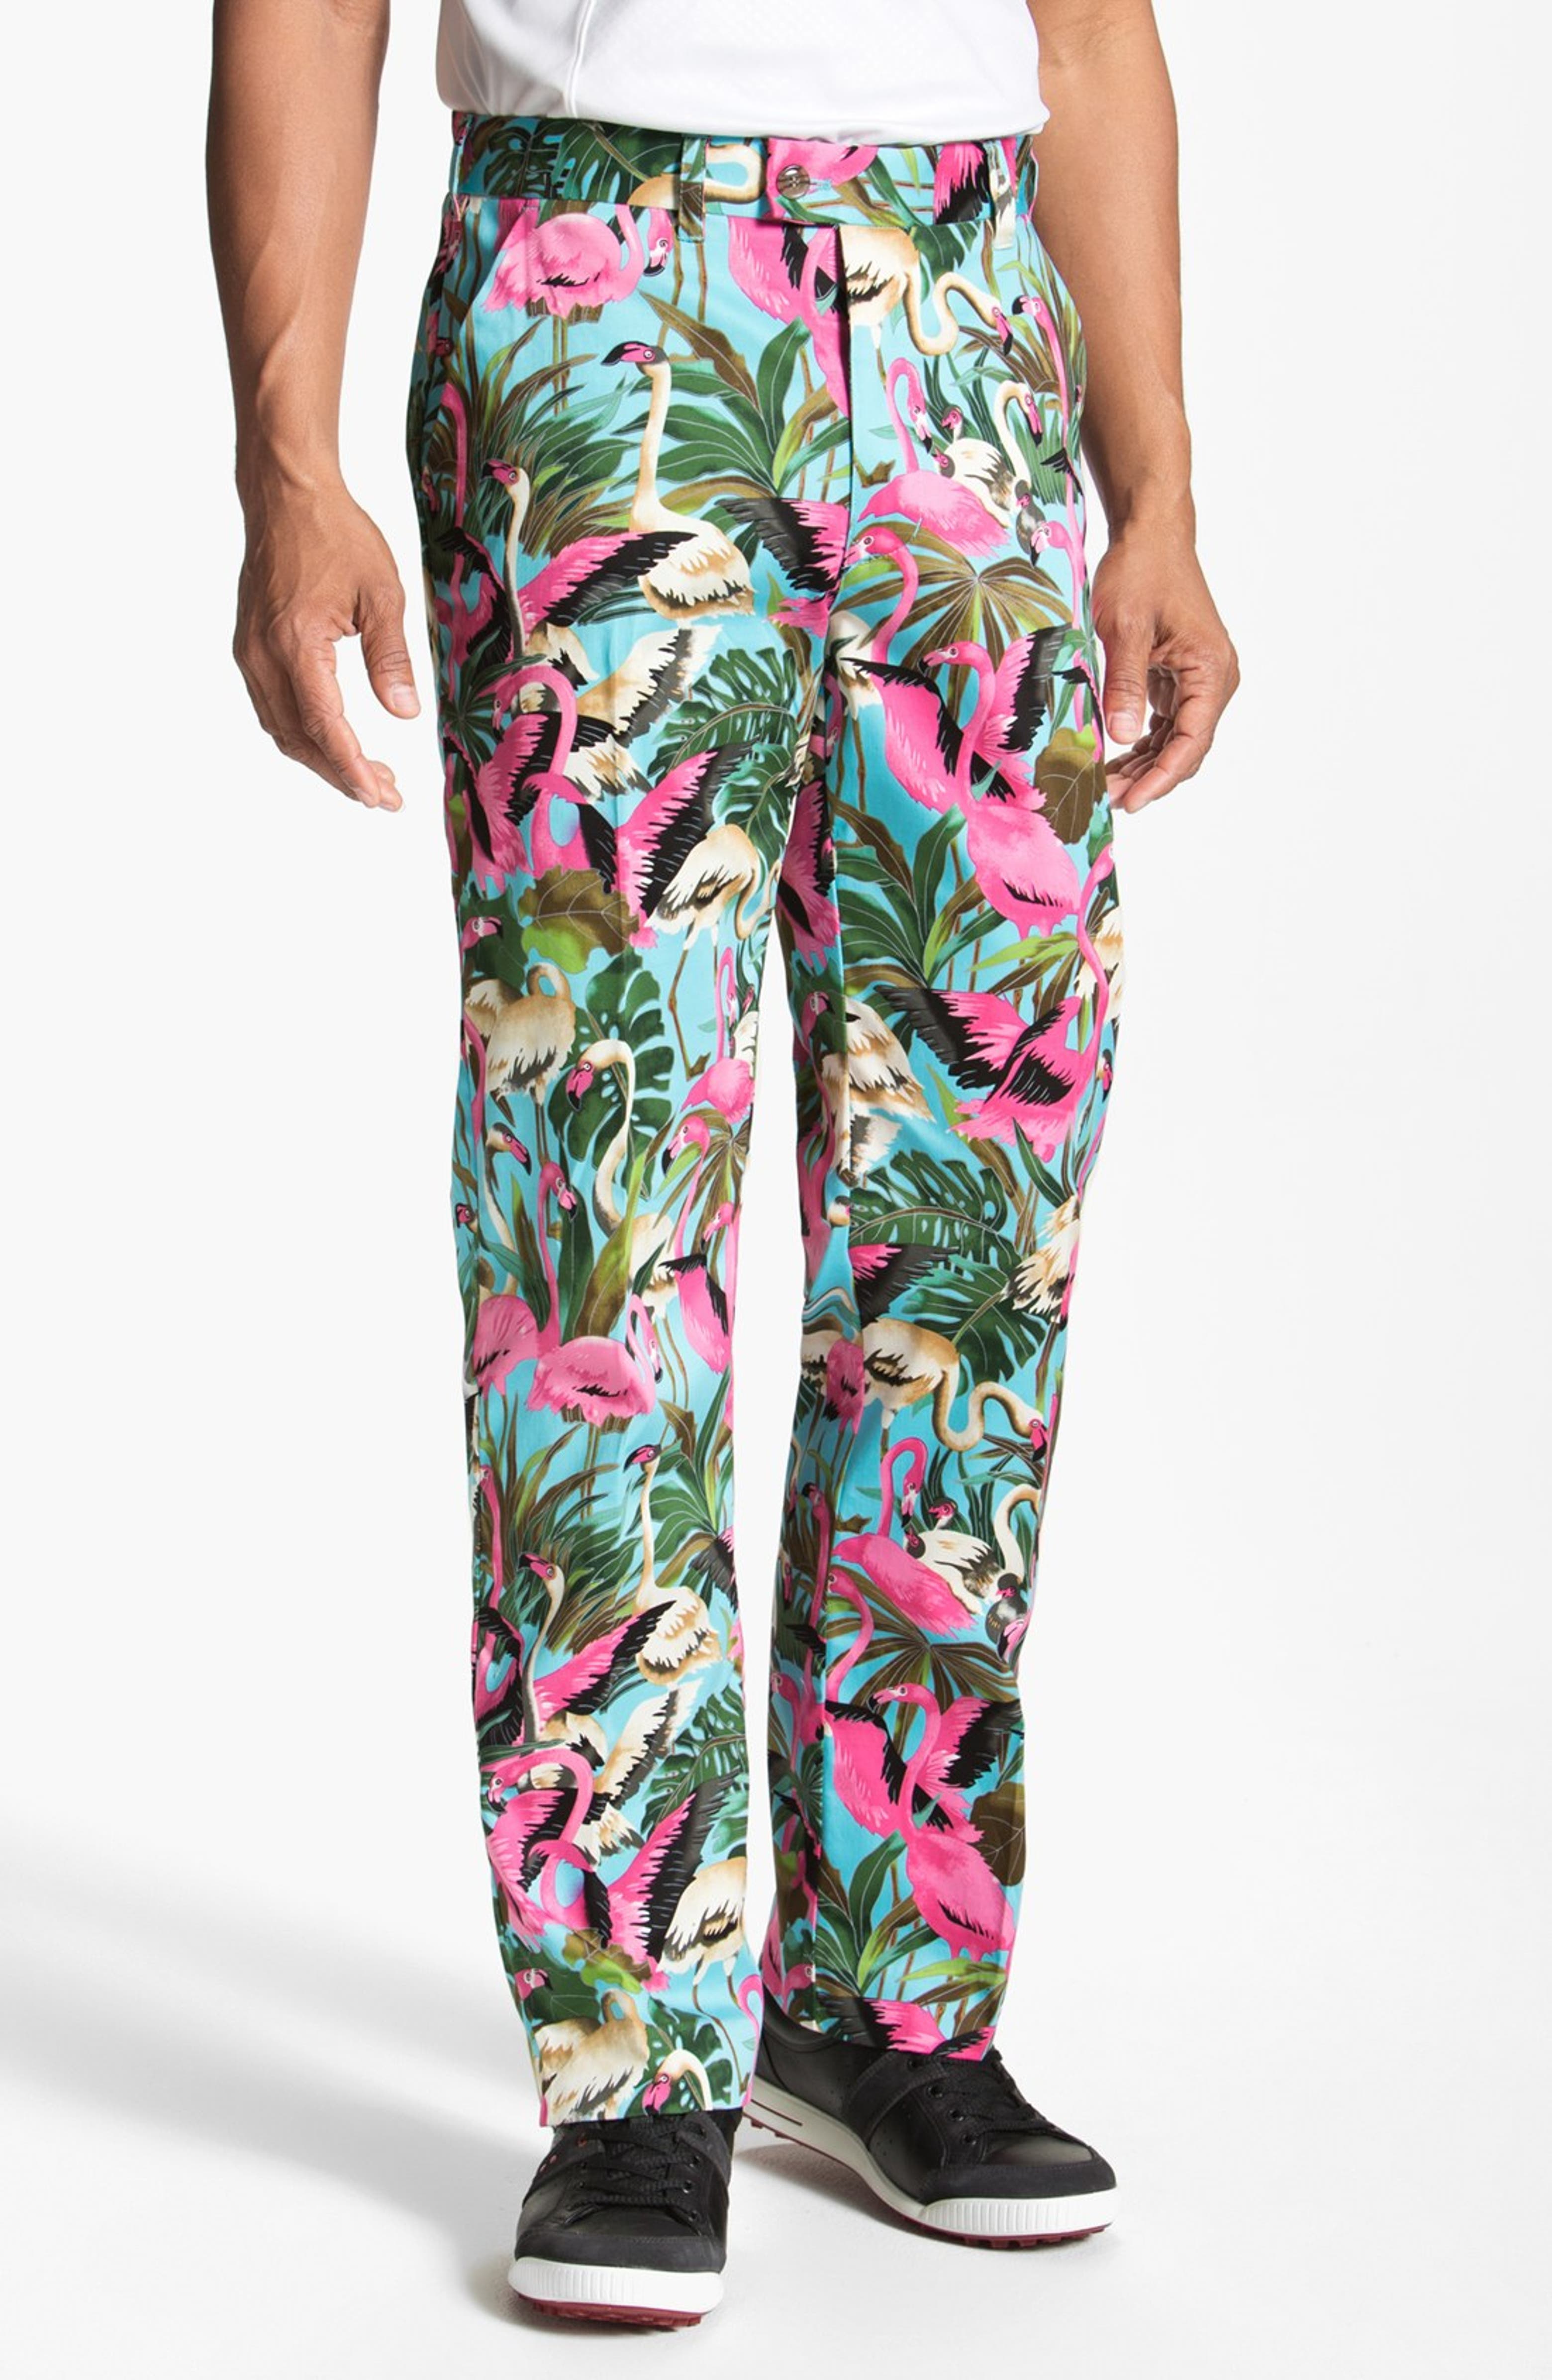 Loudmouth Golf 'Pink Flamingo' Pants | Nordstrom